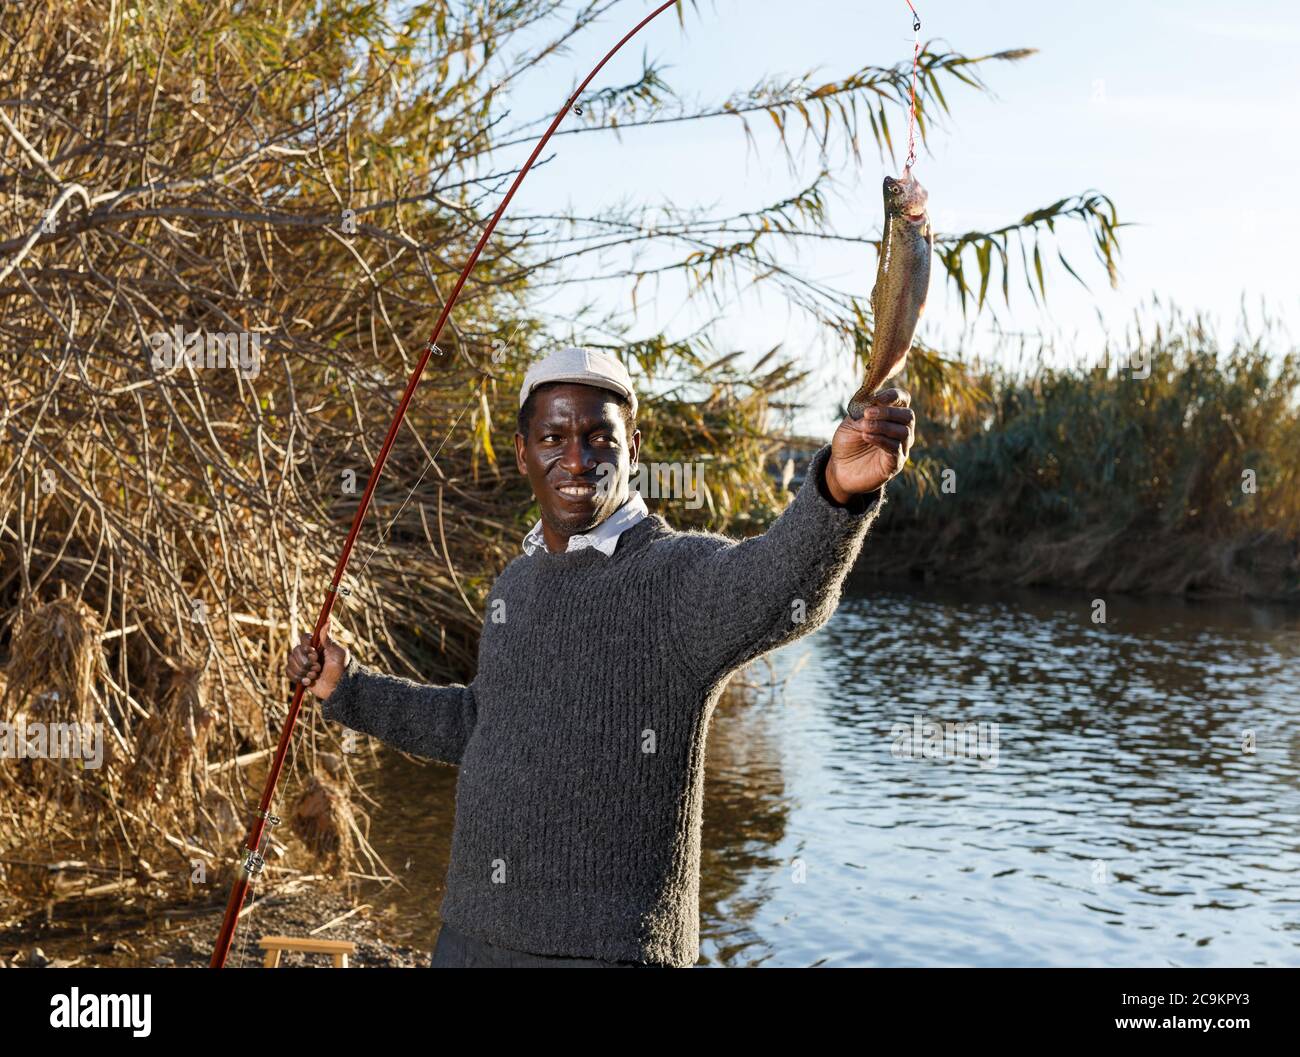 Portrait of afro fisherman holding fishing rod with fish on hook Stock Photo